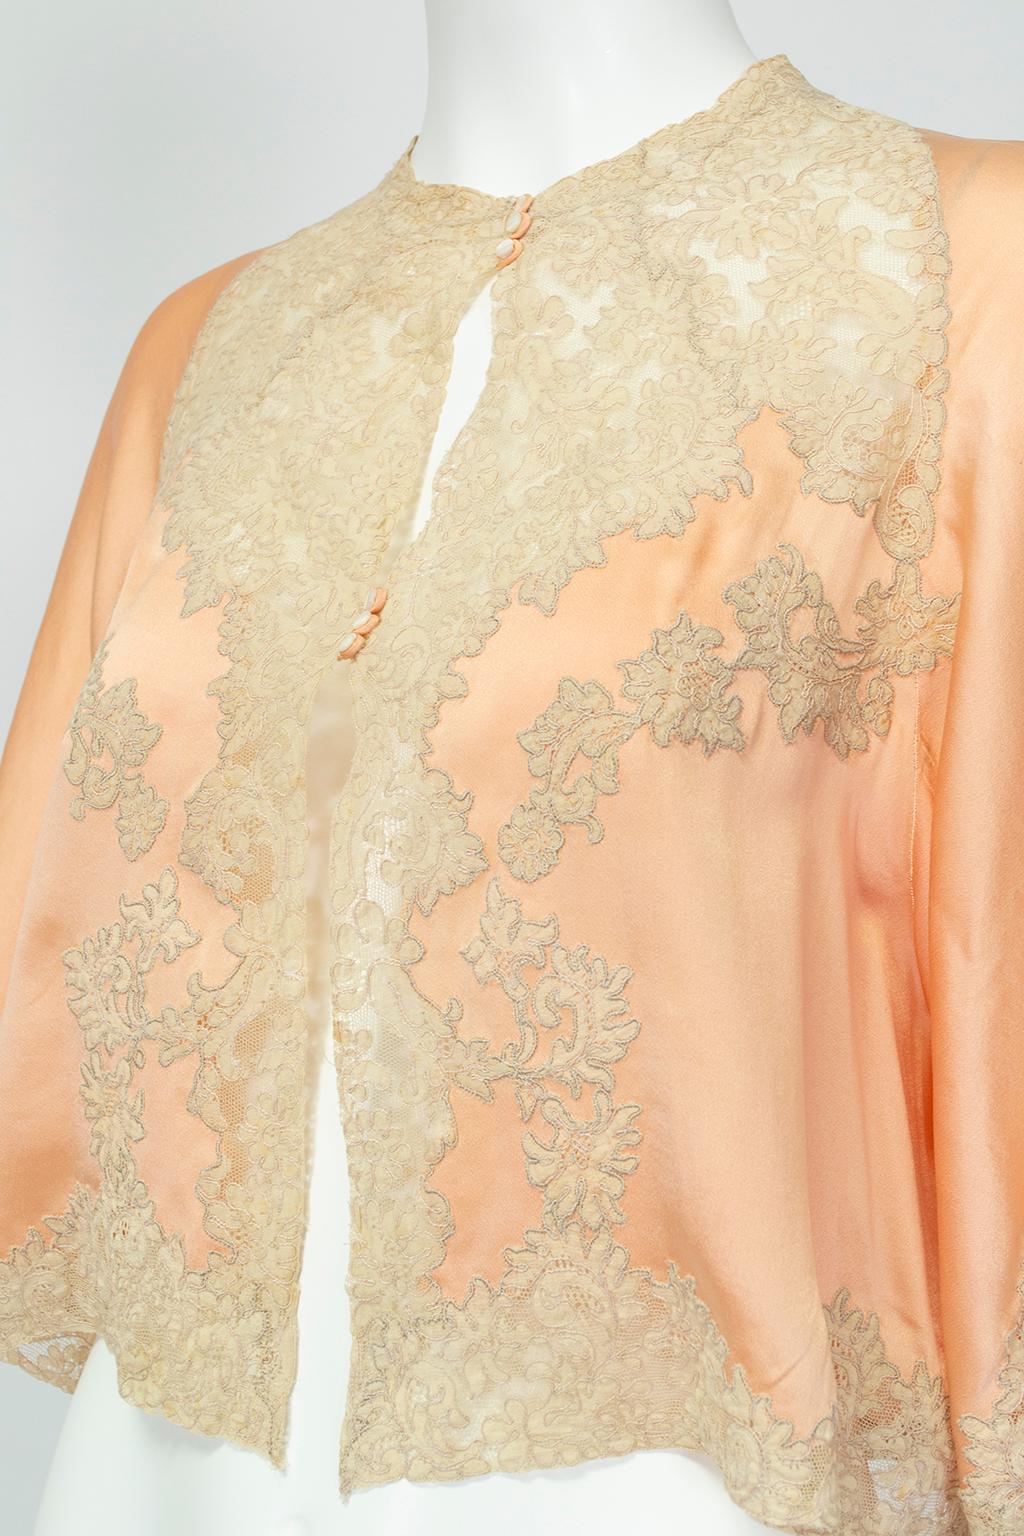 Women's Peach Charmeuse and Illusion Lace Bed Jacket with Flutter Sleeves – S-M, 1930s